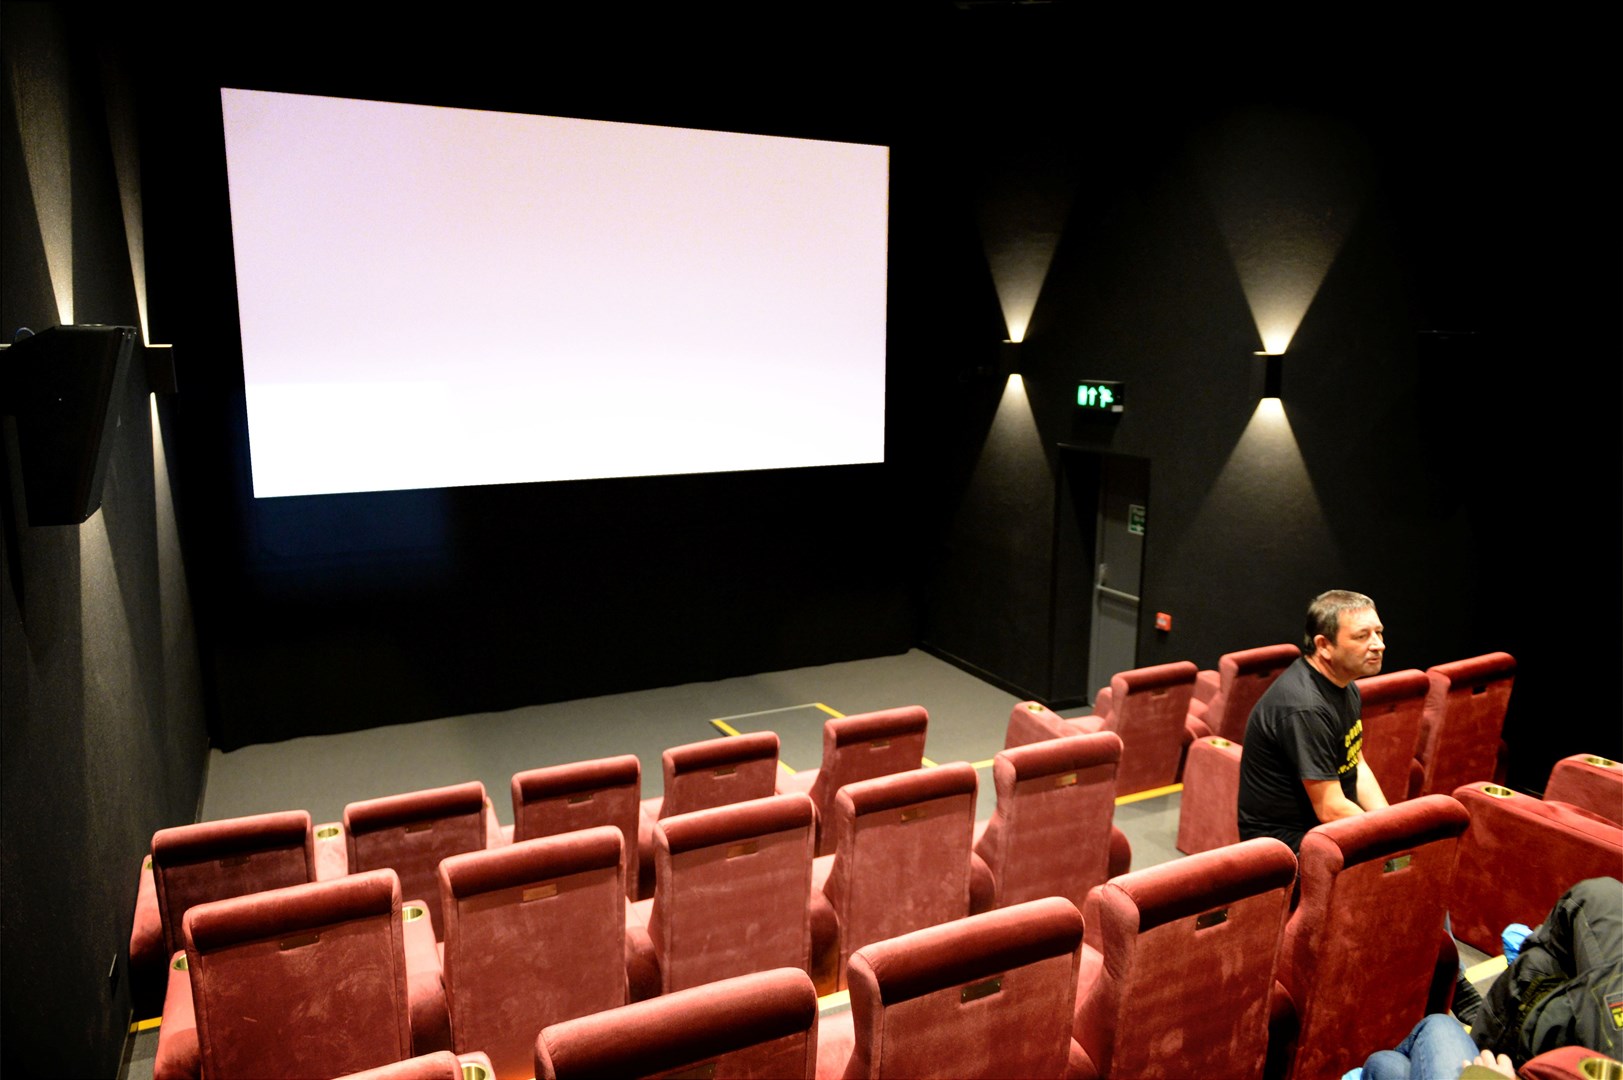 Cromarty Cinema is one of the community projects that has received revenue funding across the Ross-shire area.